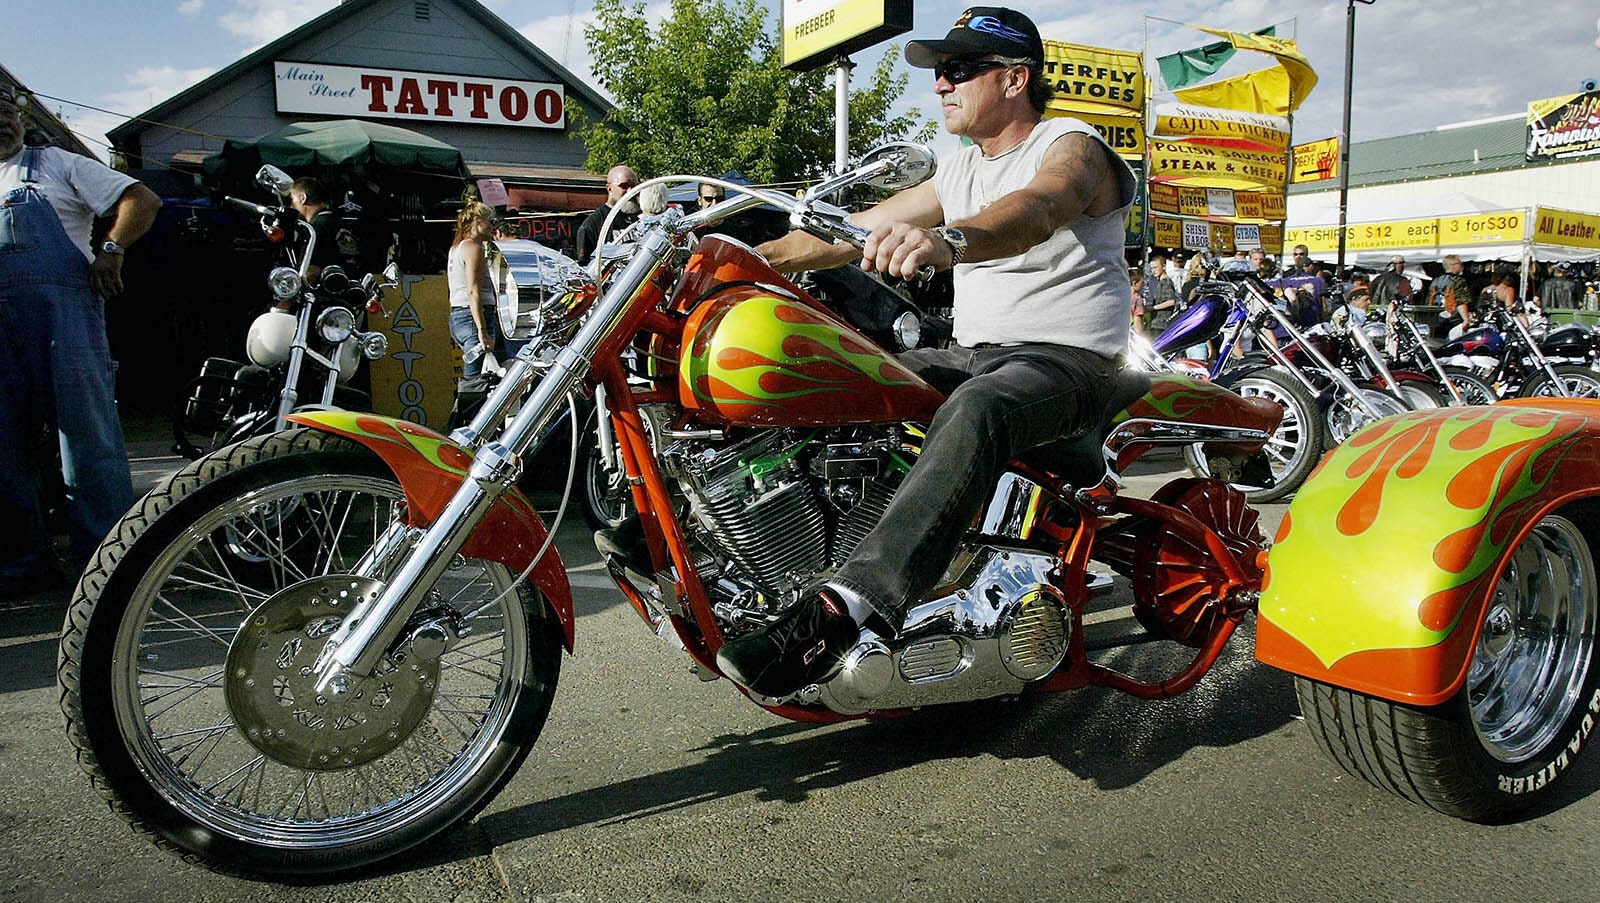 A Biker on a trike rides through downtown Sturgis during the start of the annual Sturgis Motorcycle Rally.